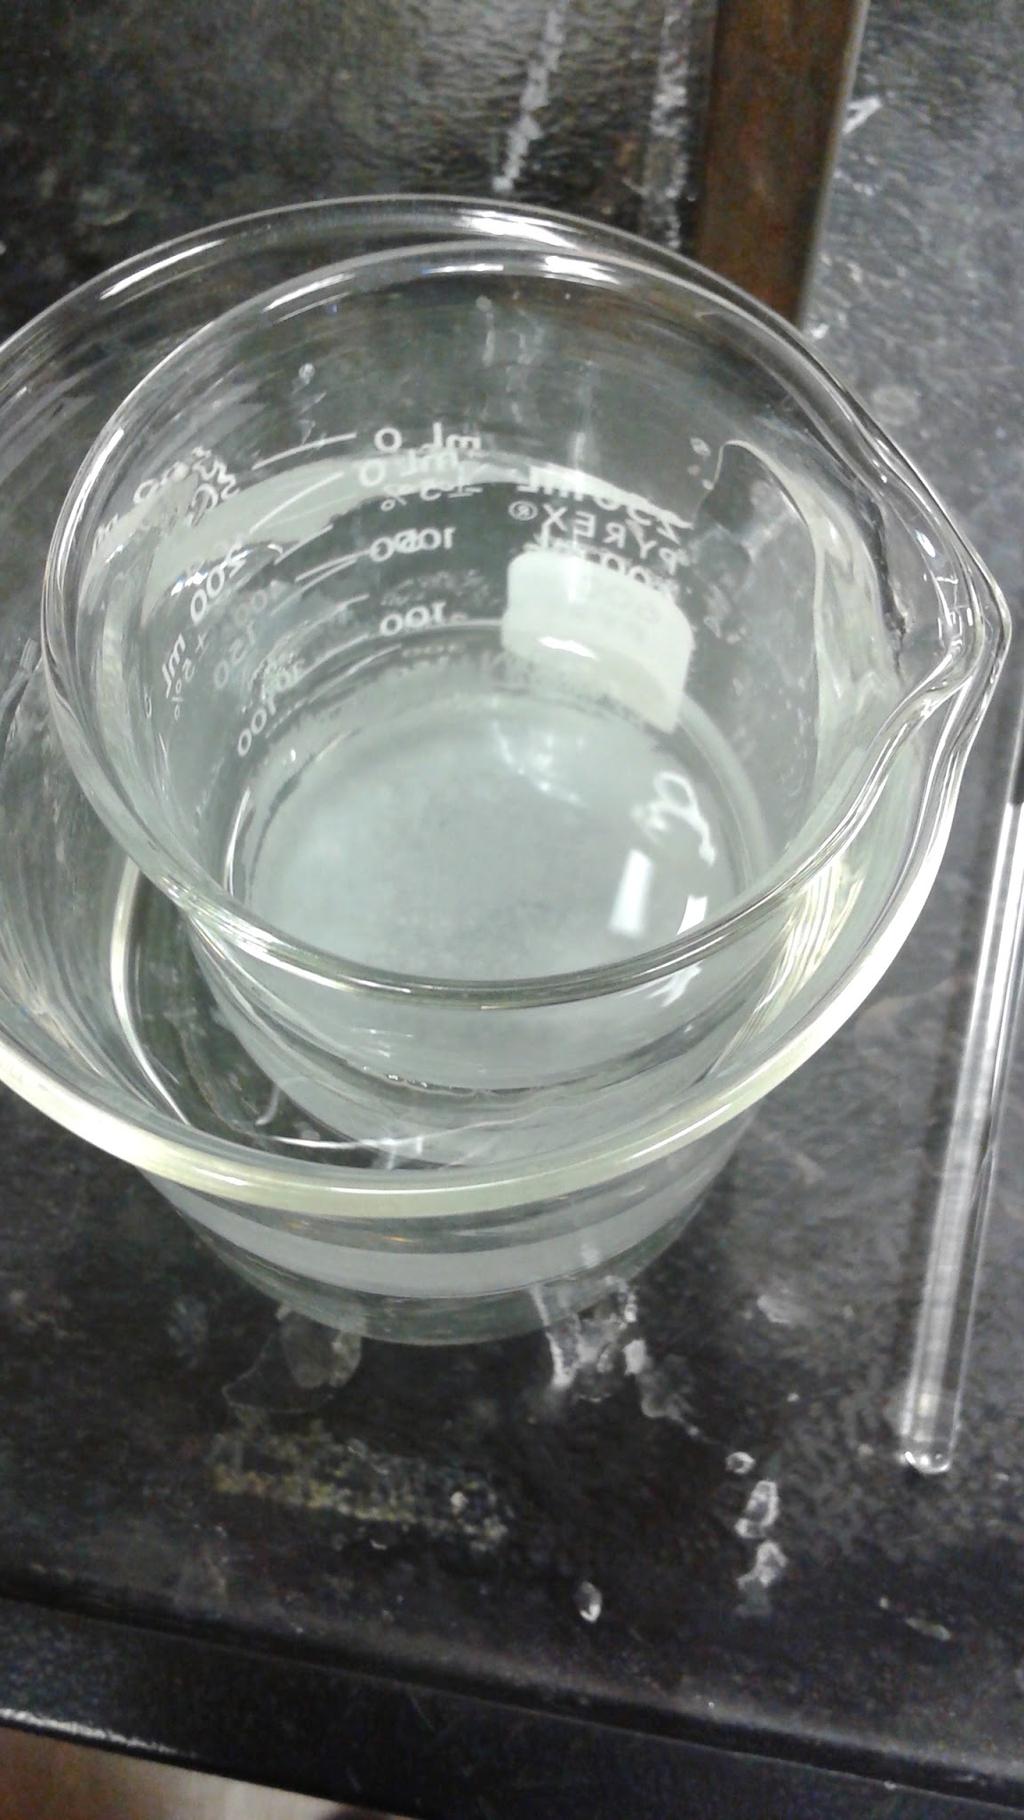 b. Up to 25-30 minutes total may be required to form the crystallization desired. Figure 9 Figure 10 14.